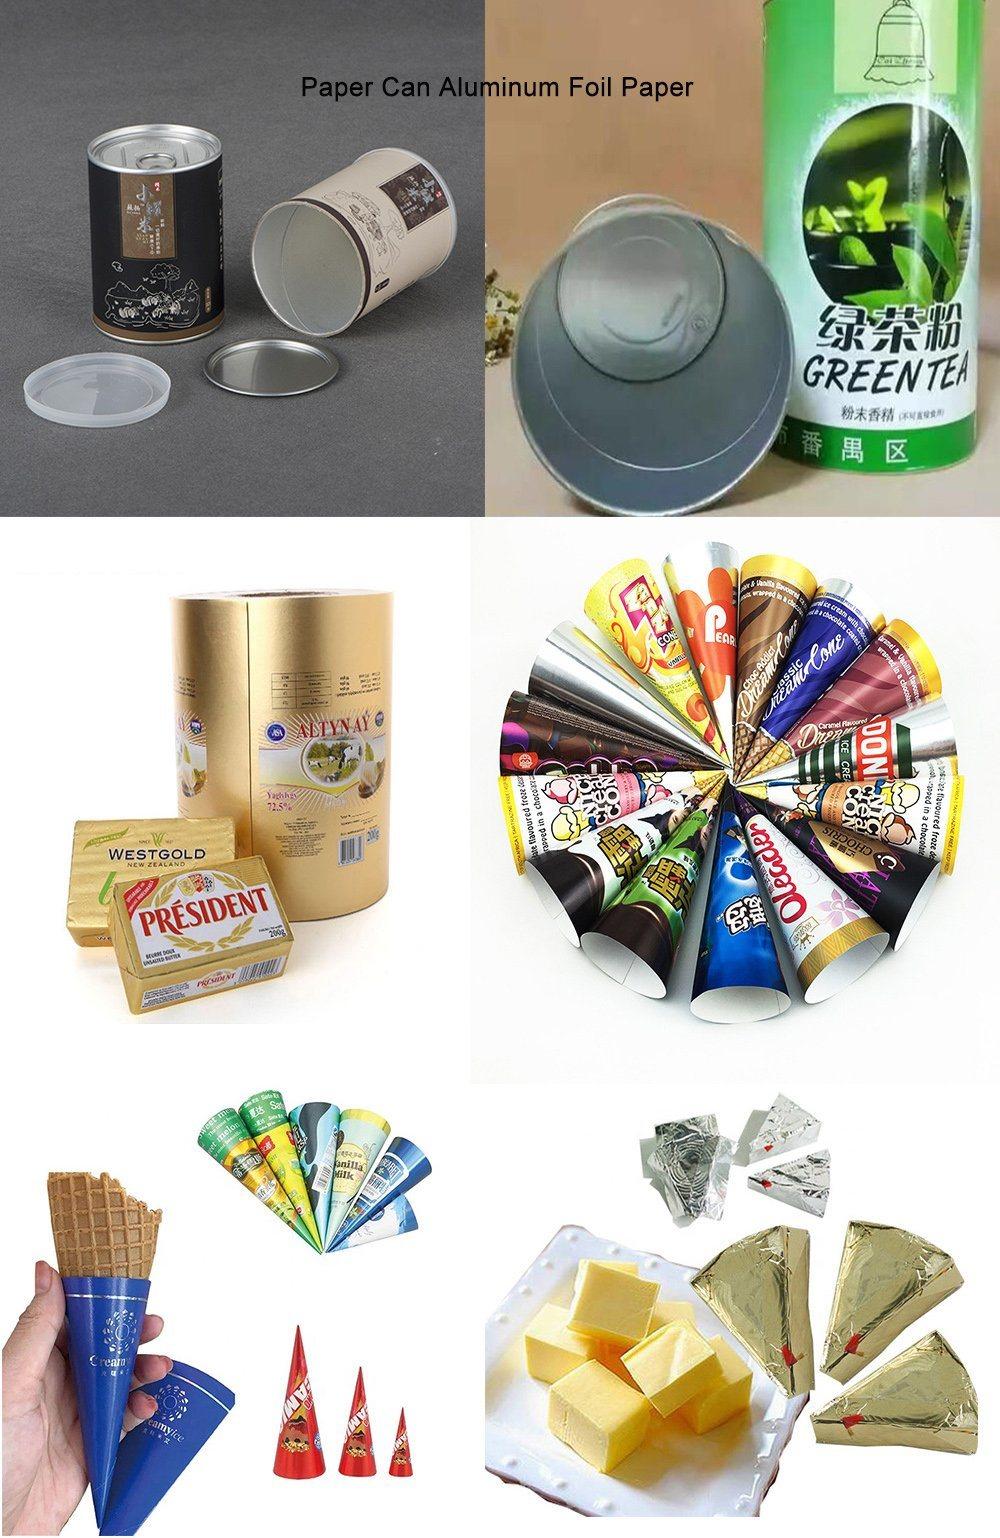 Butter Alcohol Prep Pad Cigarette Chocolate Chewing Gum Can Tube Ice Cream Food Wrapping Aluminum Foil Laminate Paper